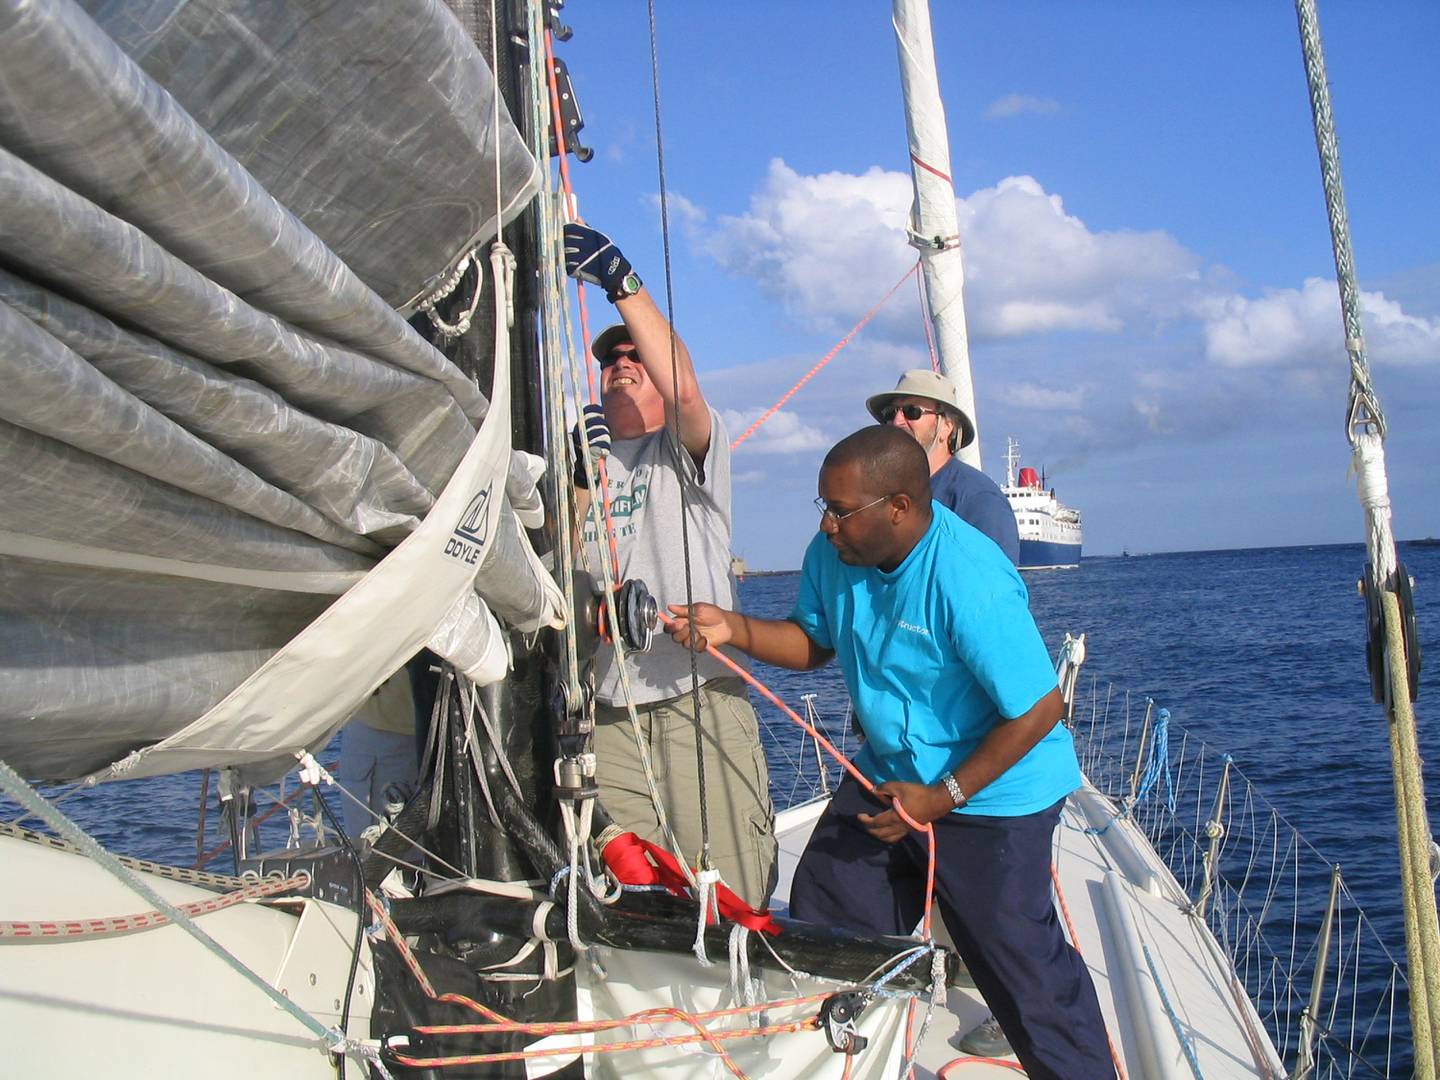 In 2006, Lawson a 24 years old crewed on the boat called Ocean Planet owned by skipper Bruce Schwab.